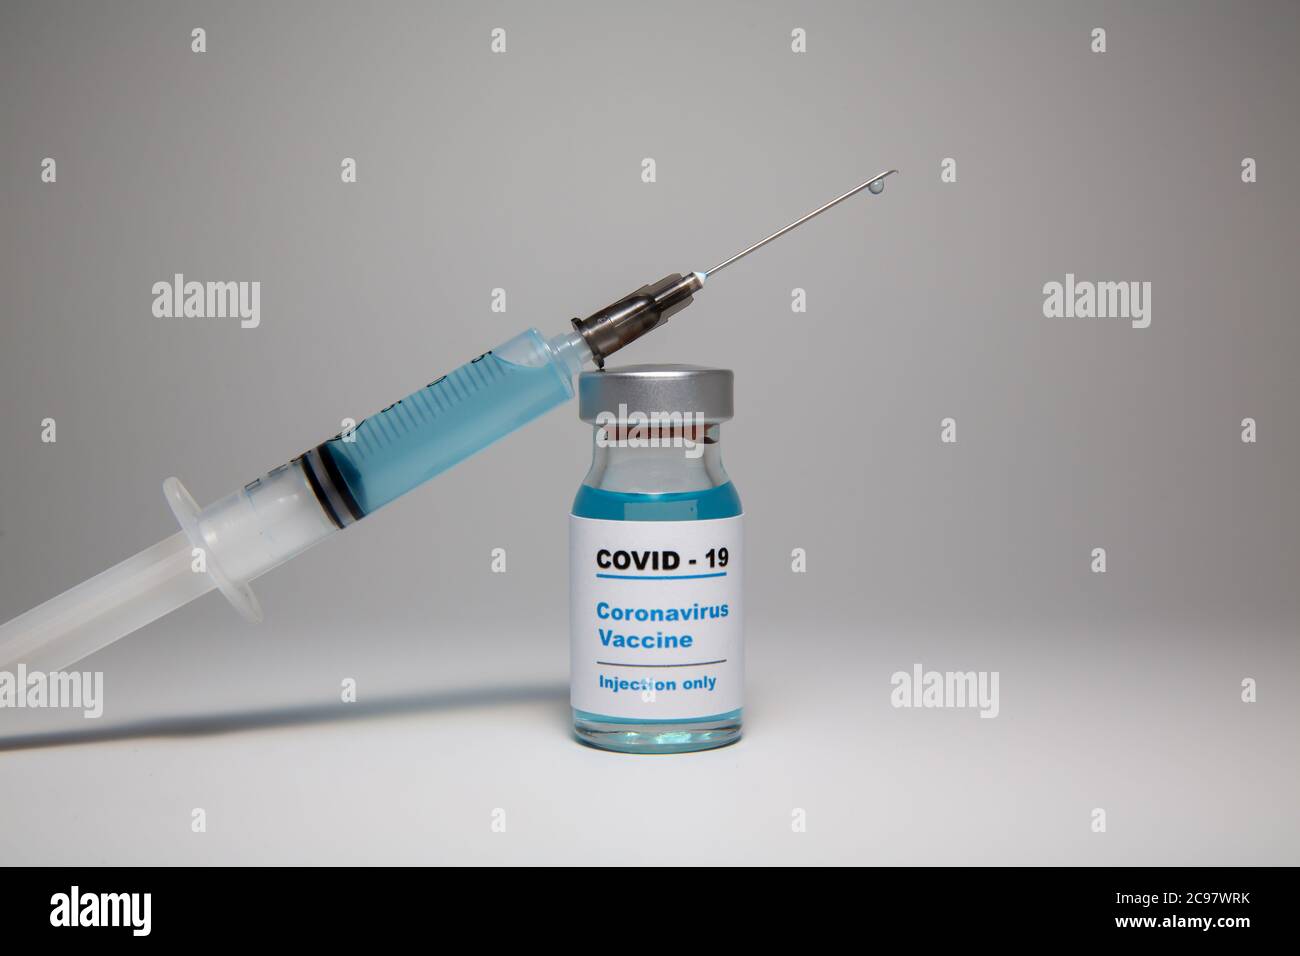 Small vaccine bottle (phial) with a label that reads 'Covid - 19 Corona virus Vaccine injection only' and a medical syringe injection with a vaccine d Stock Photo